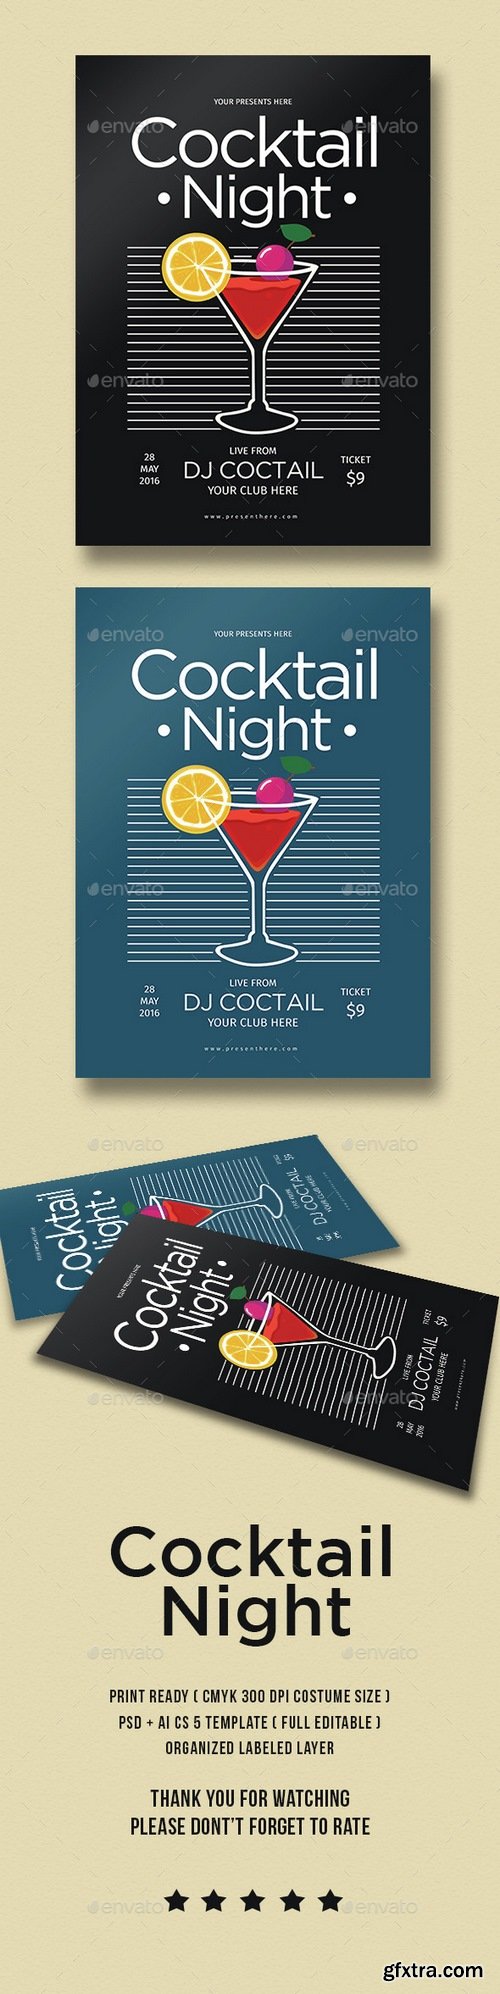 Graphicriver - Cocktail Night Party 15373547